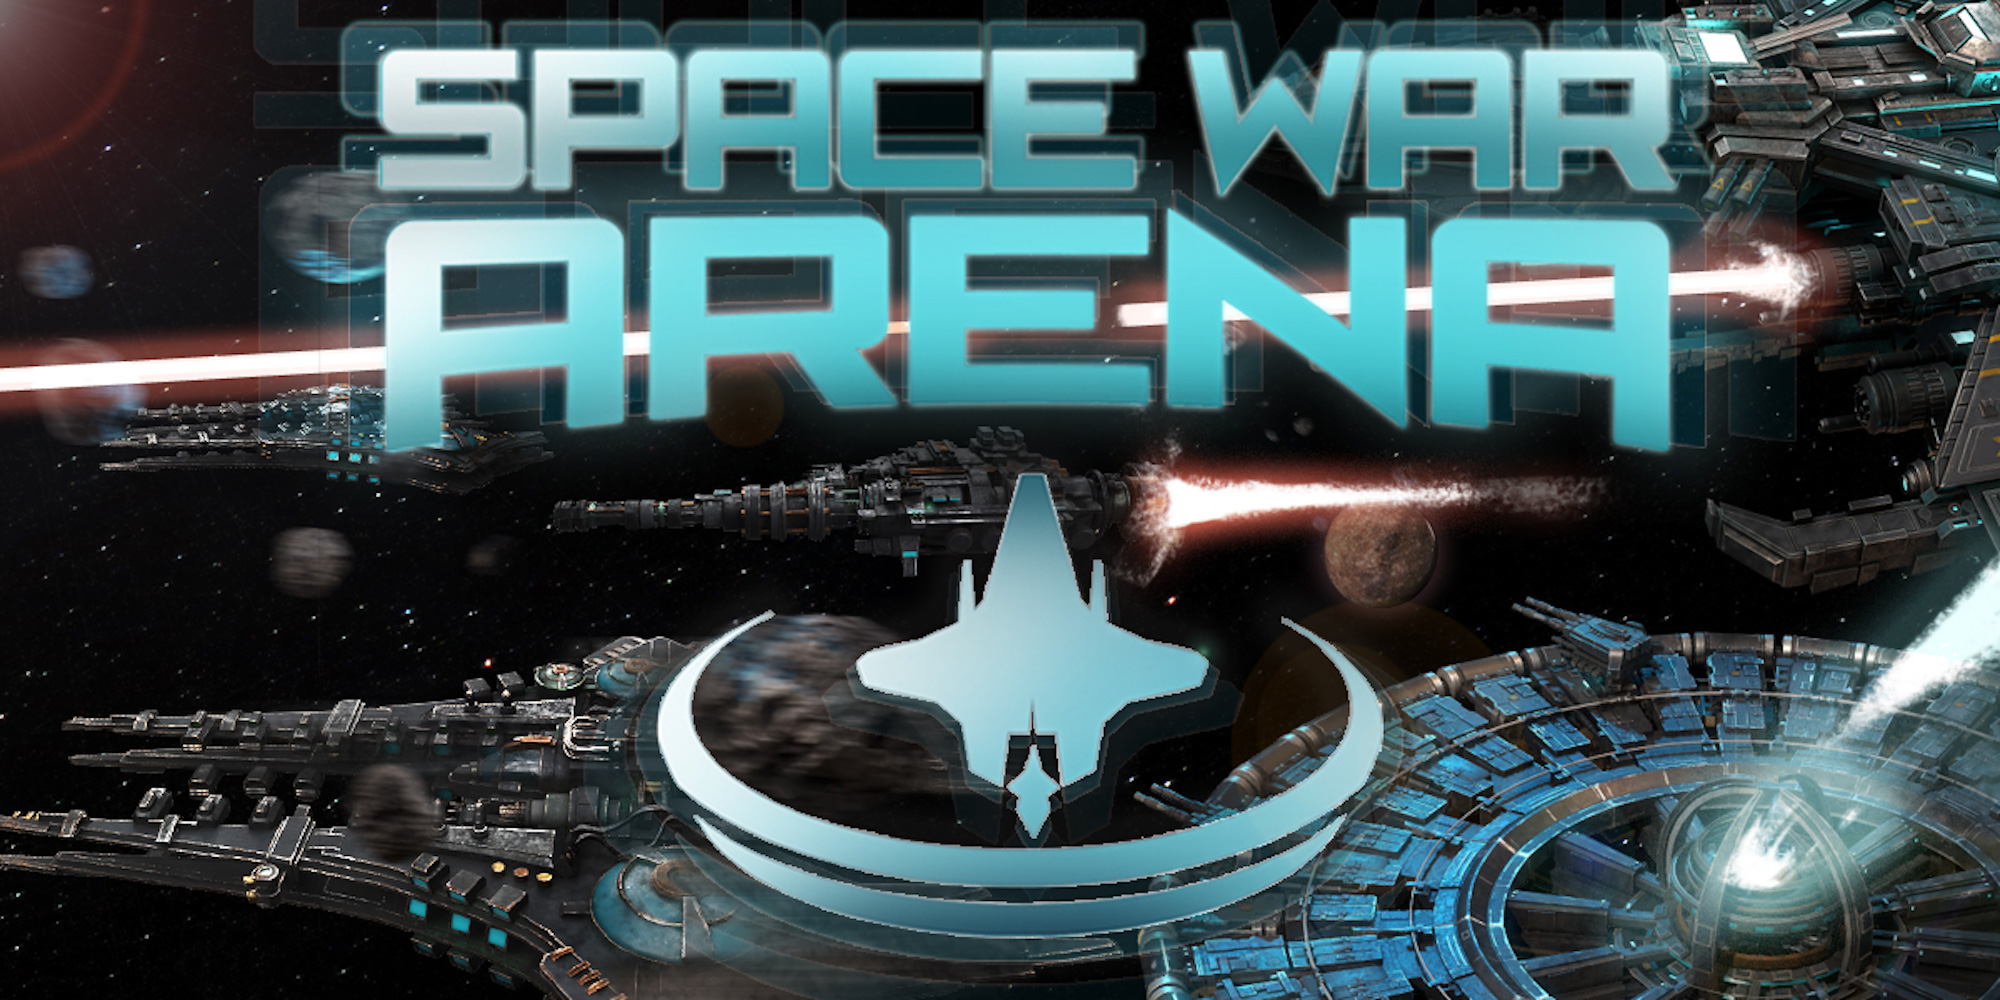 Space War Arena for Nintendo Switch - Nintendo Official Site